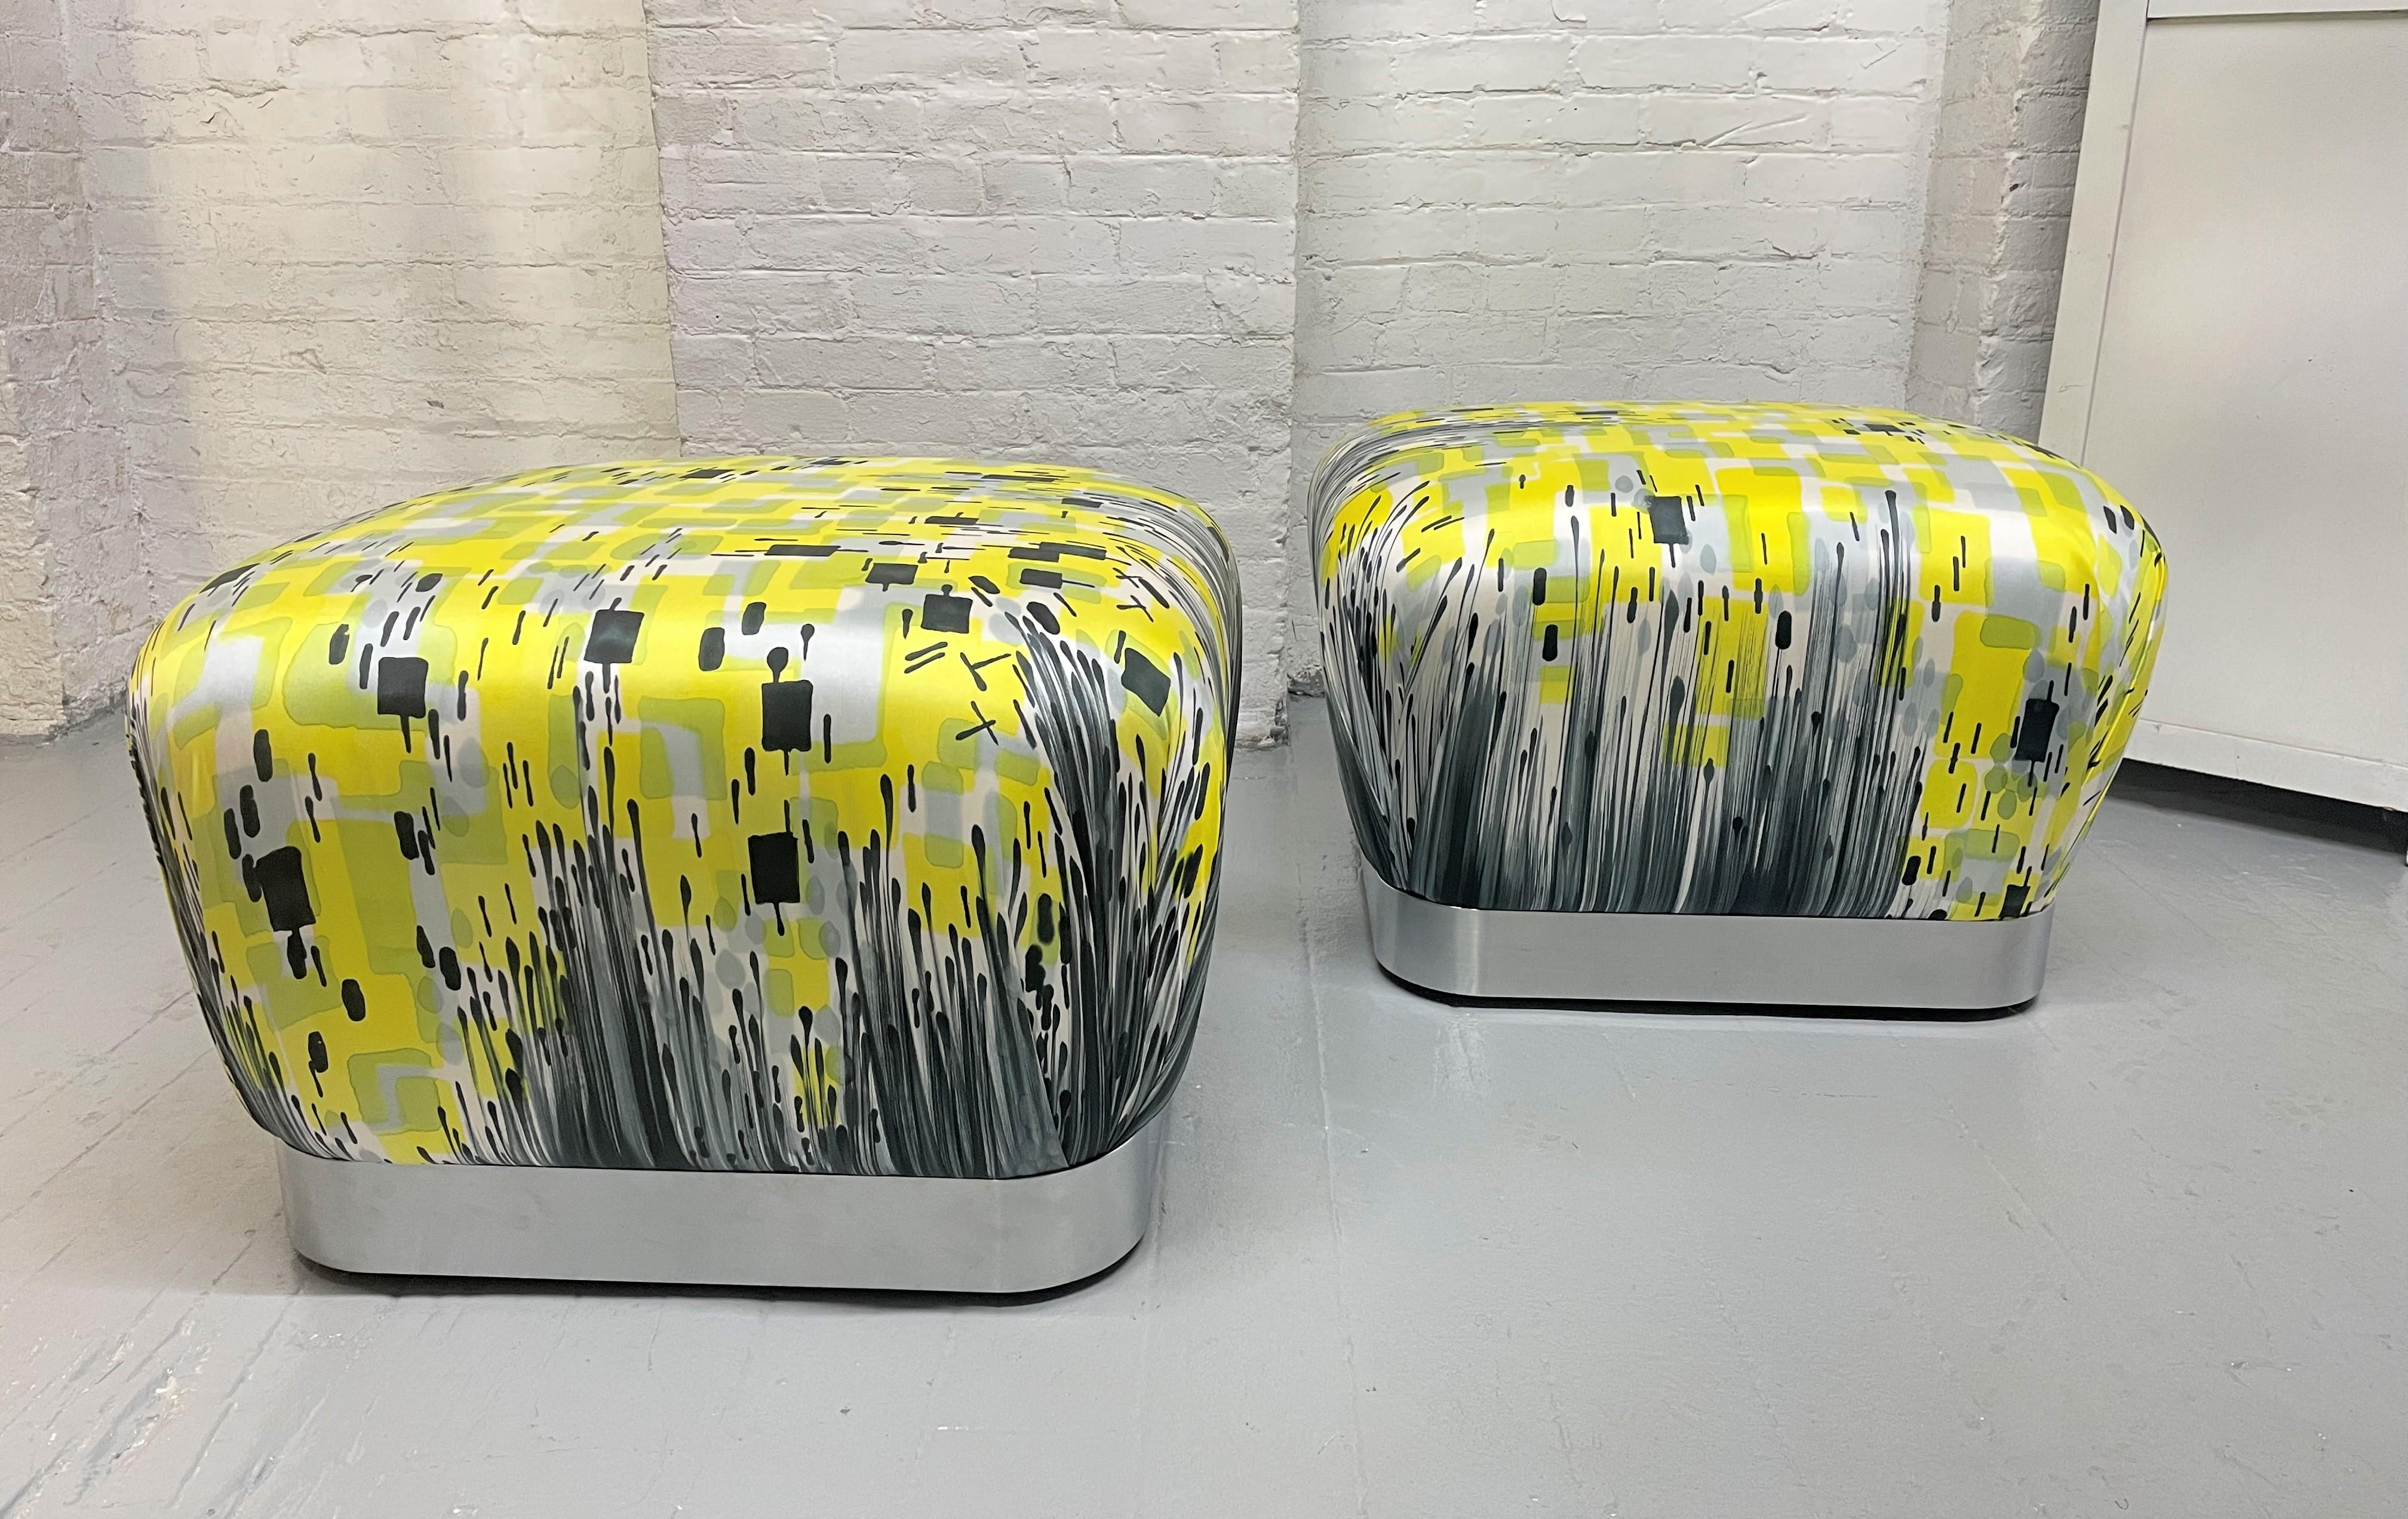 Pair of Karl Springer Souffle Ottomans / Poufs.  The bases of the ottomans are brushed steel and upholstered in satin with a hand-painted abstract pattern by artist Michelle Li Murphy.  The ottomans also have casters.